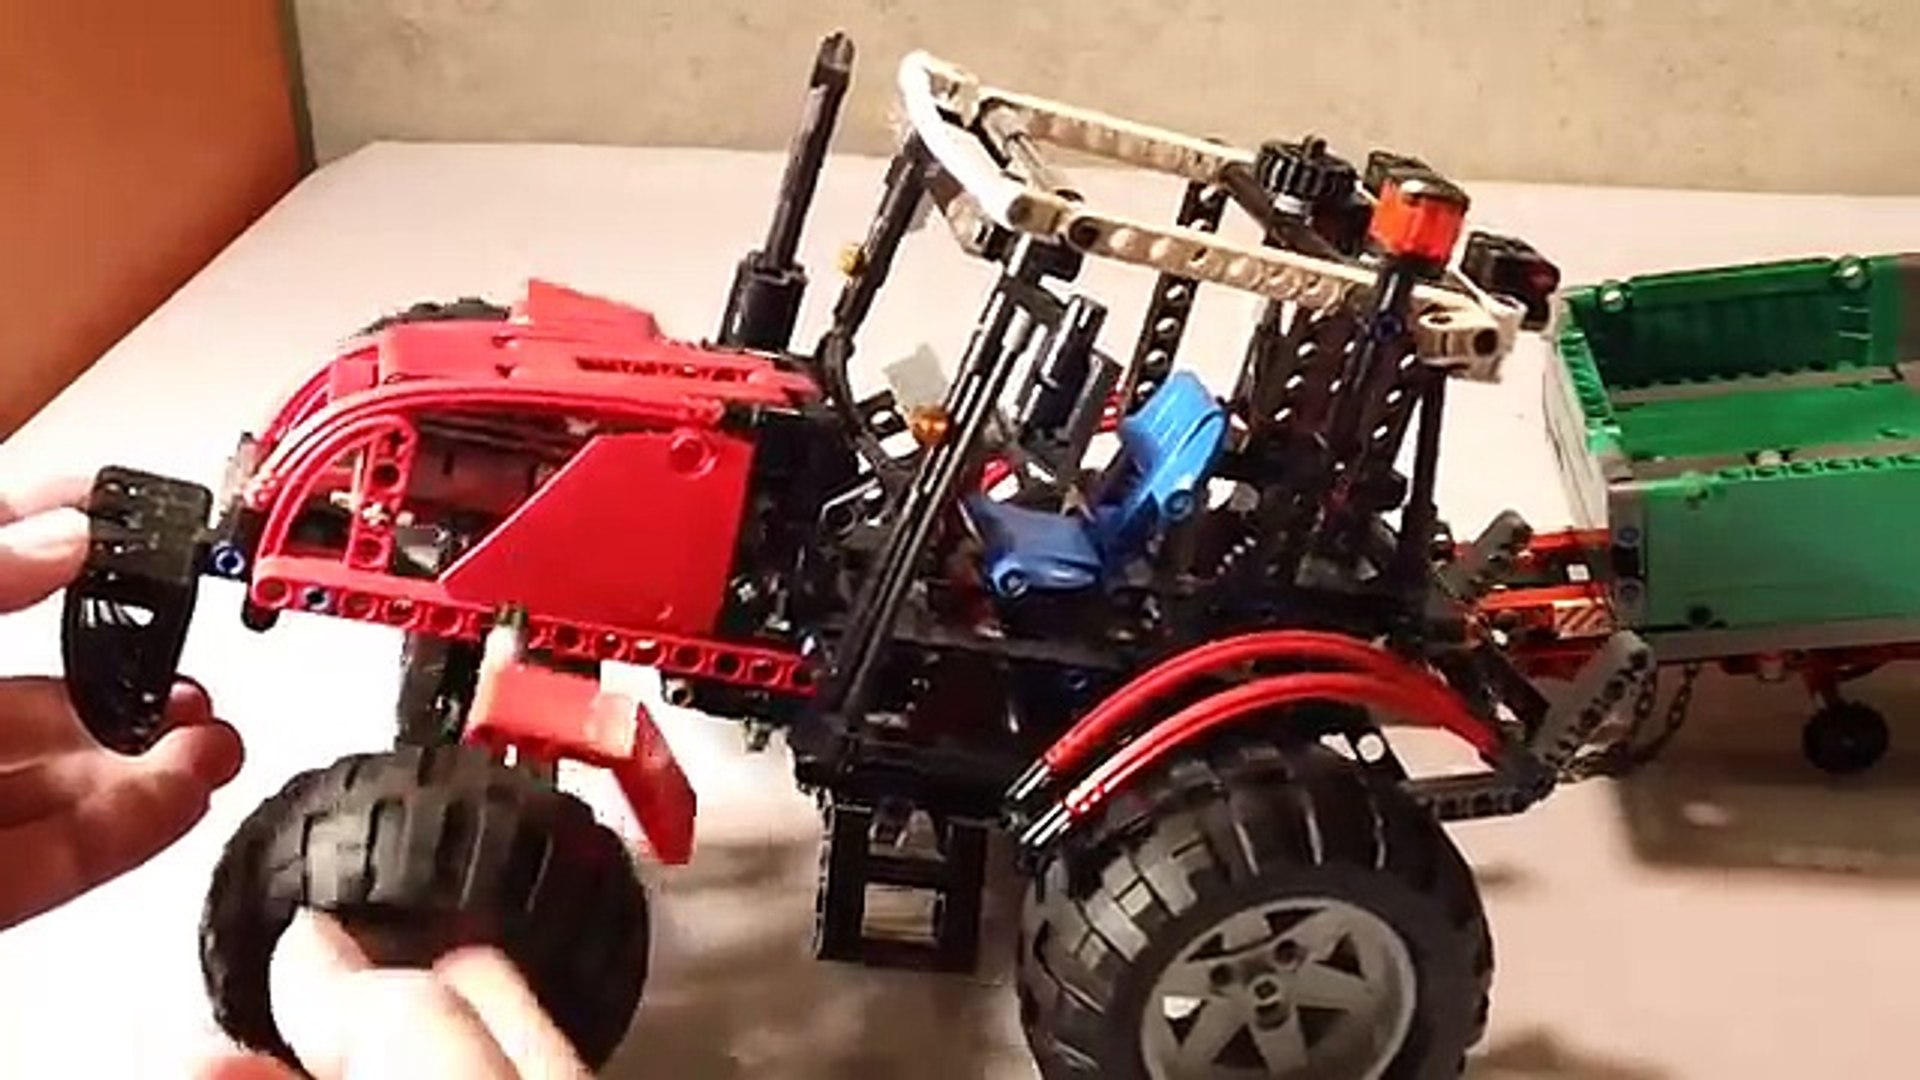 HD] LEGO Technic 8063 Tror with Trailer Review - video Dailymotion